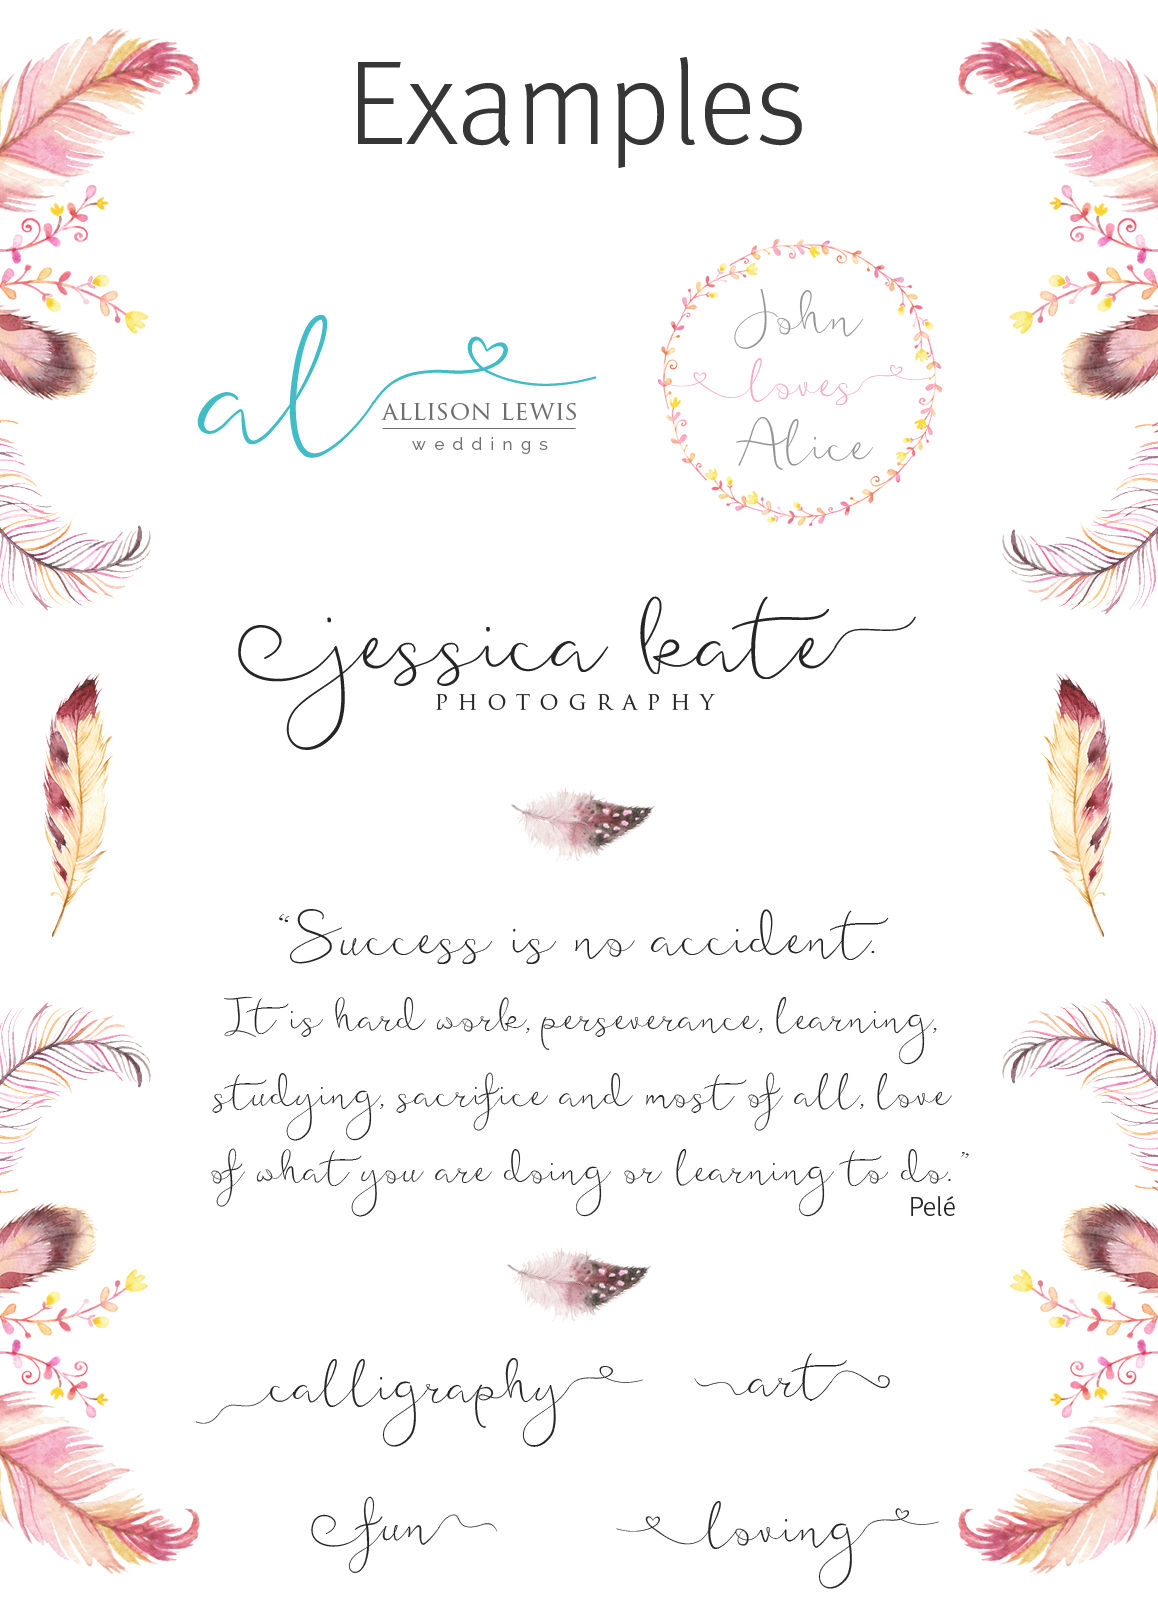 Featherly Font Family By Joanne Marie Thehungryjpeg Com